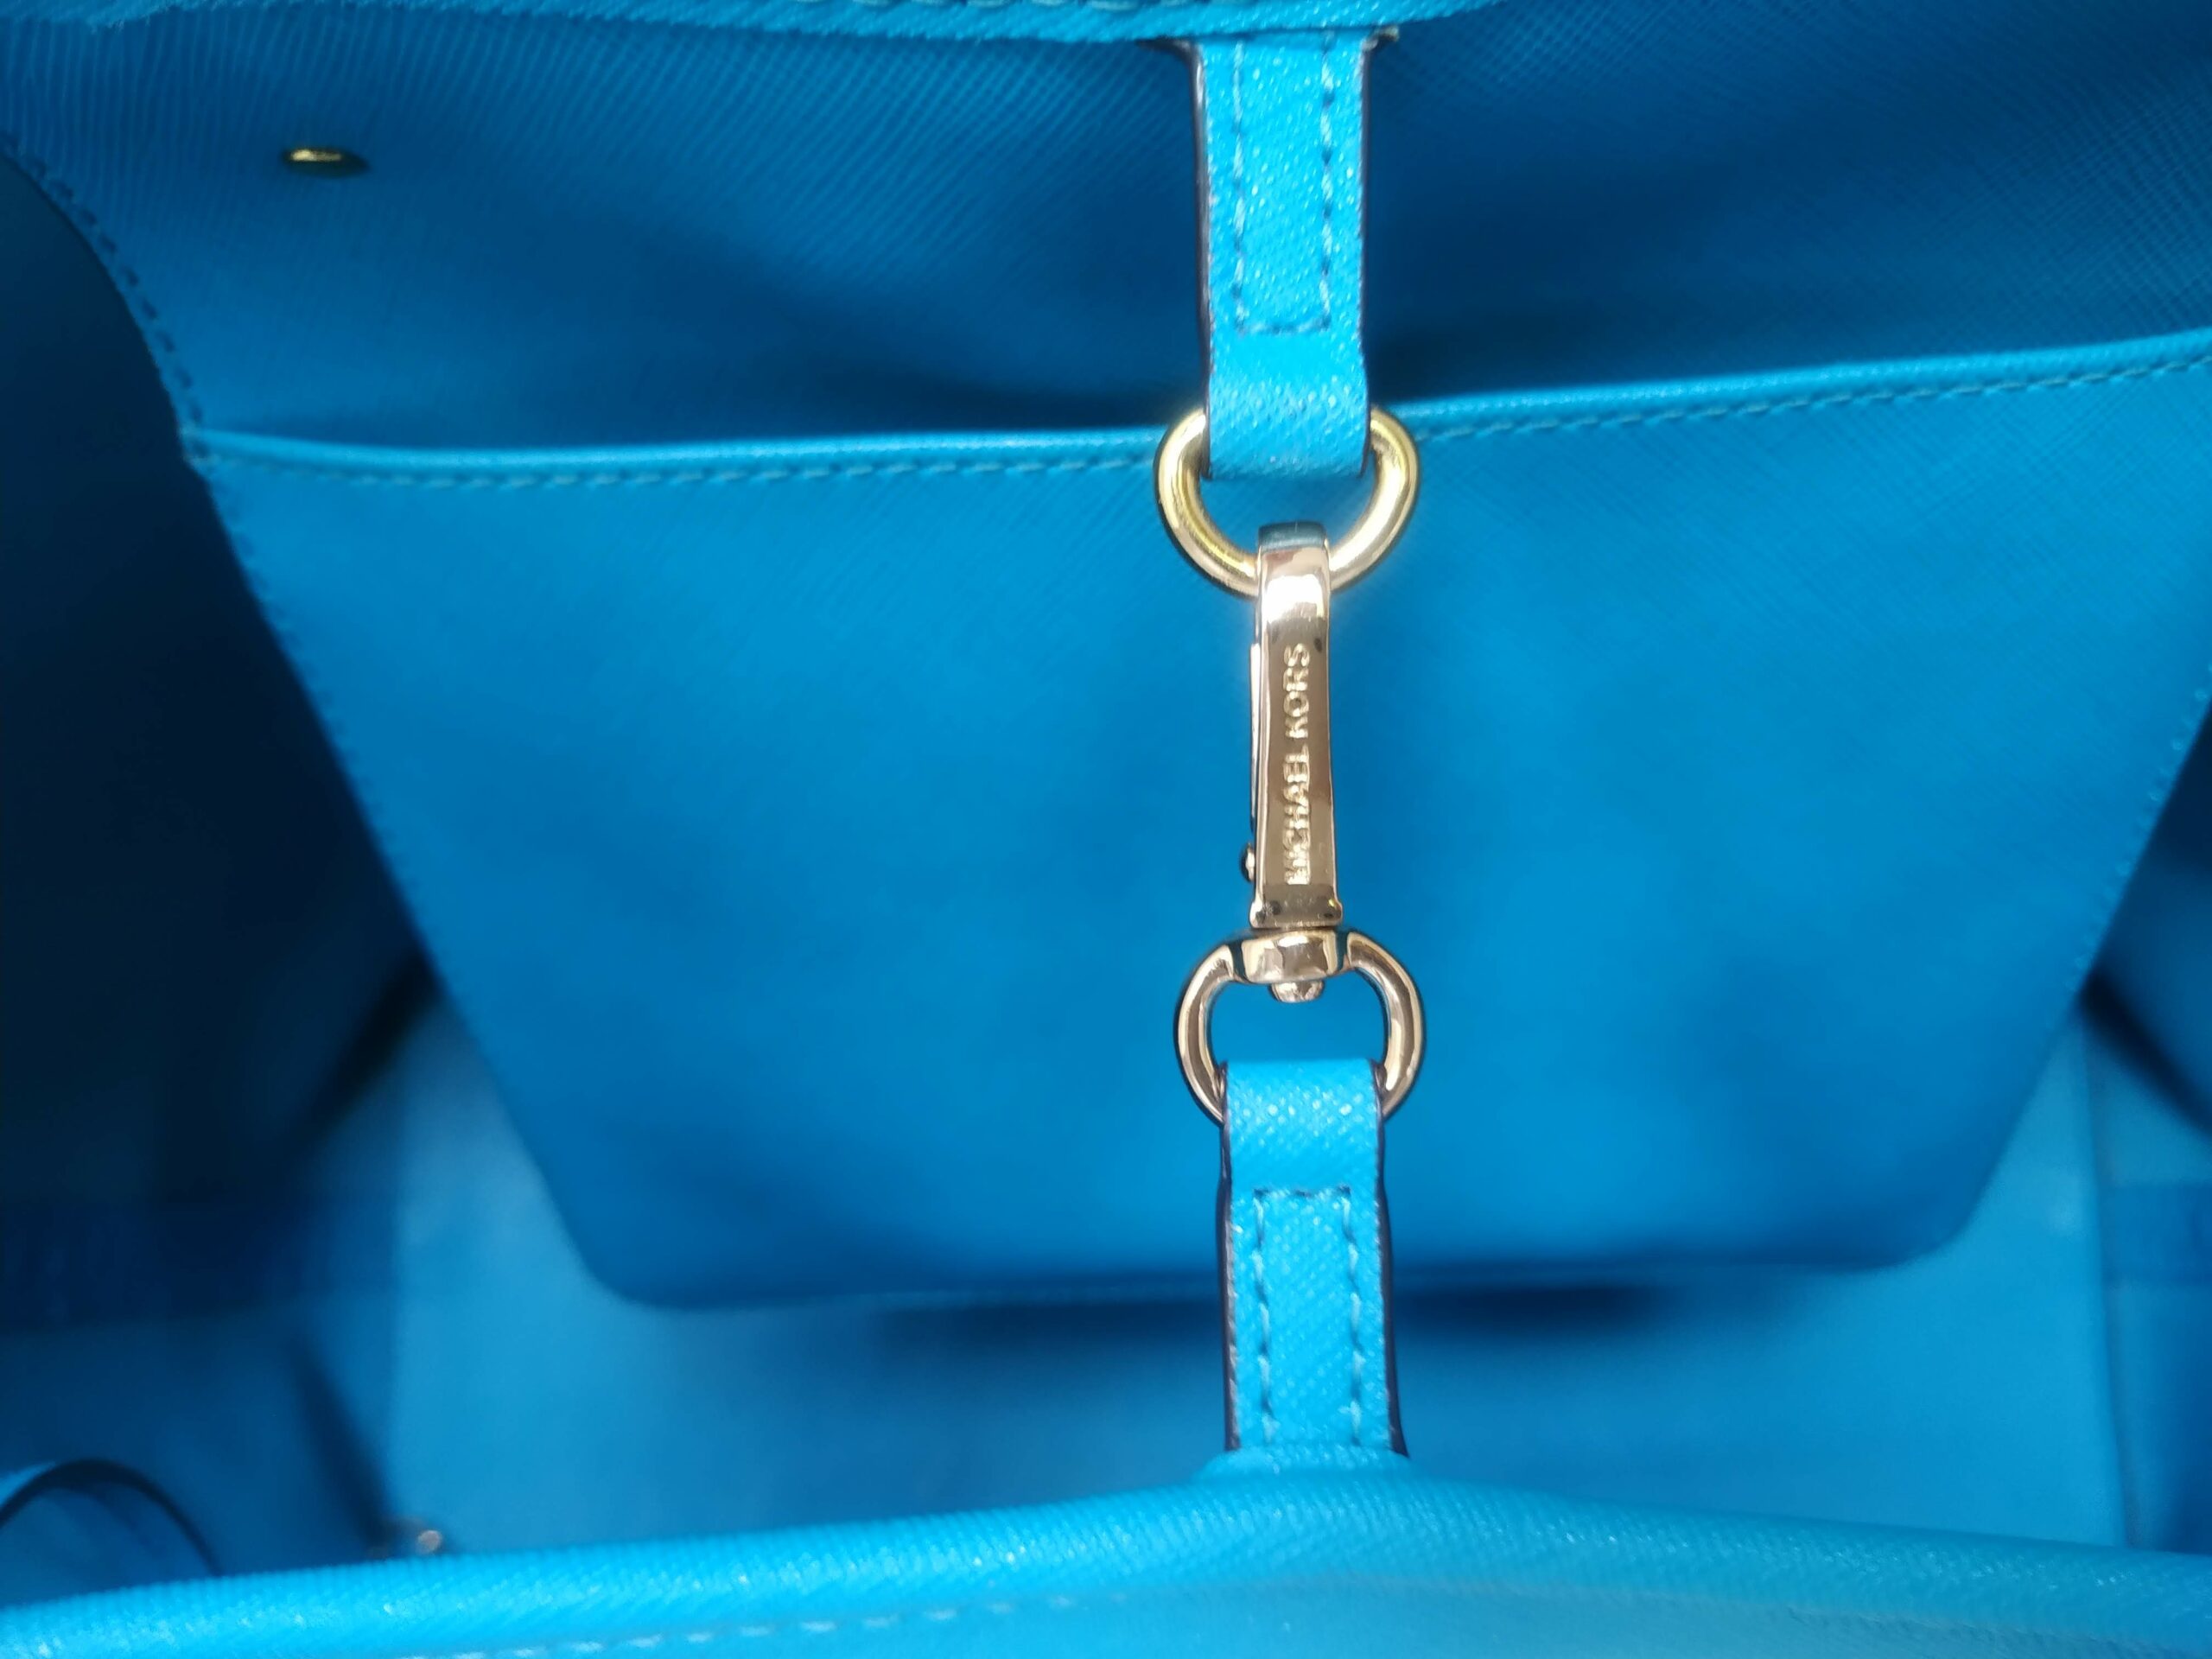 Michael Kors Tote Bag - Leather Blue Teal Turquoise